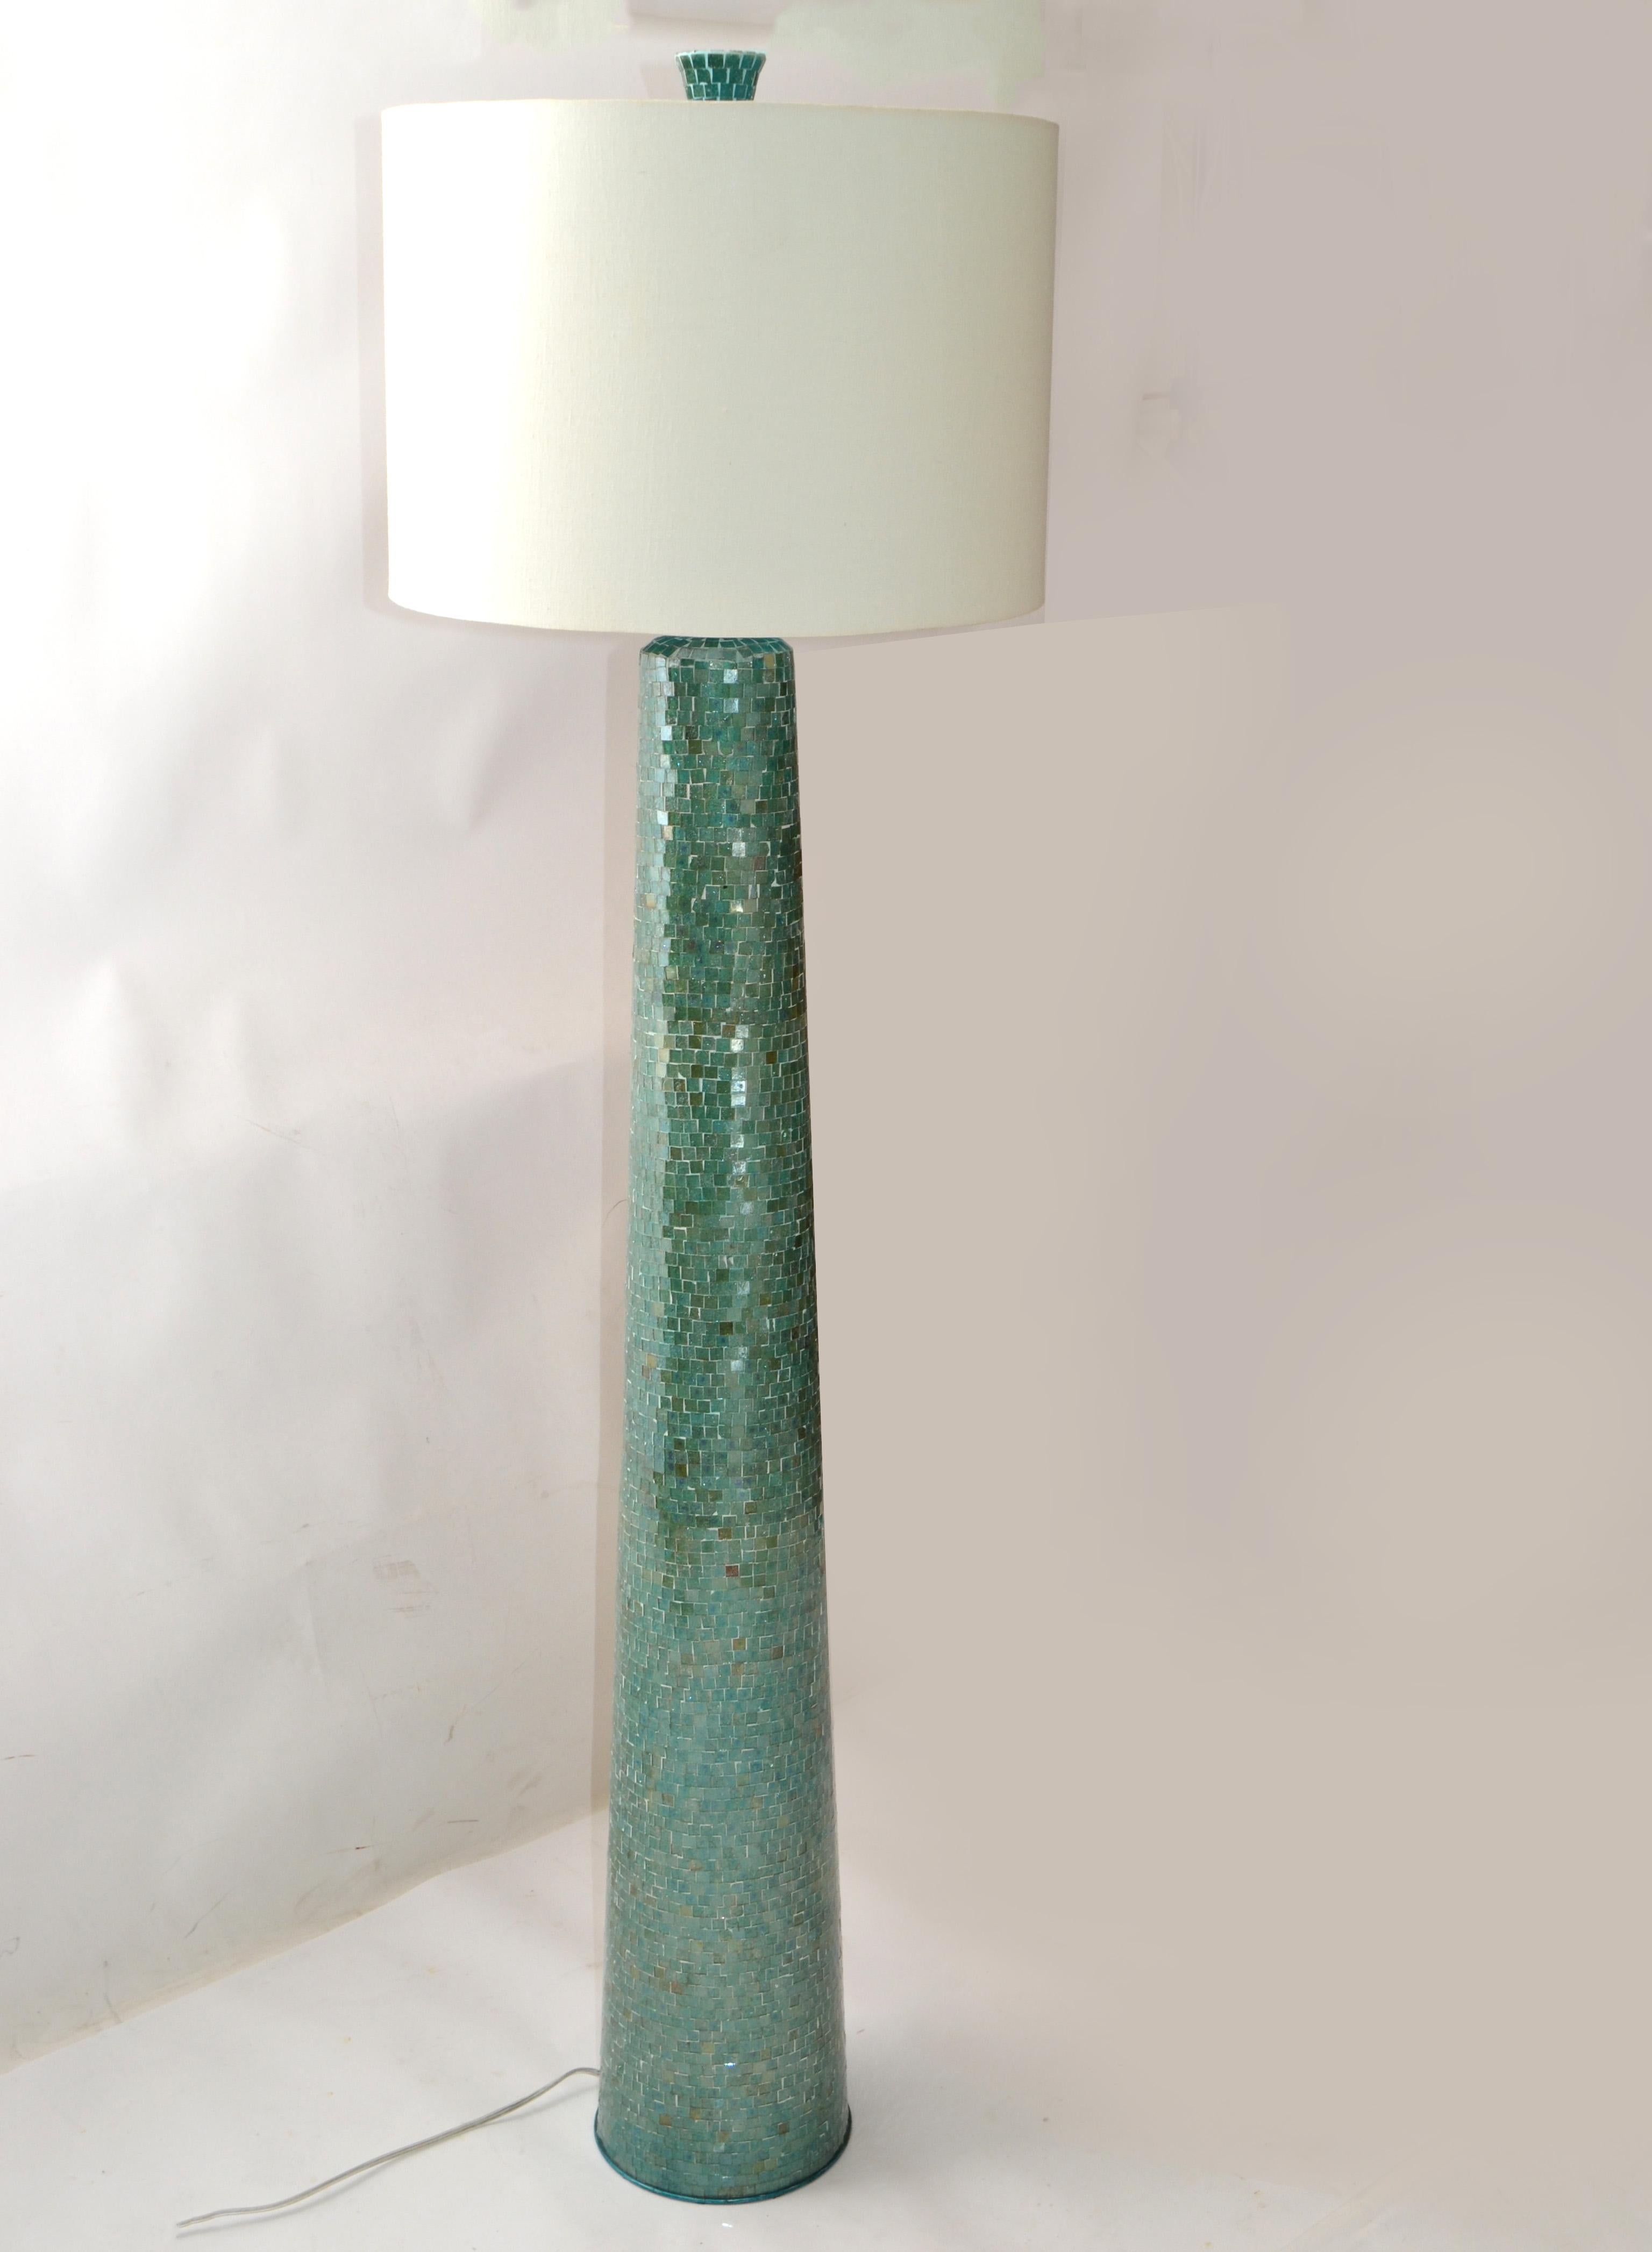 Hollywood Regency 1970s floor lamp in hues of green mosaic glass pieces over a wood Cone Shaped Lamp Body with Chrome hardware.
Every single piece of glass is cut and fixed by hand guaranteeing high quality, each artistic element is unique in its